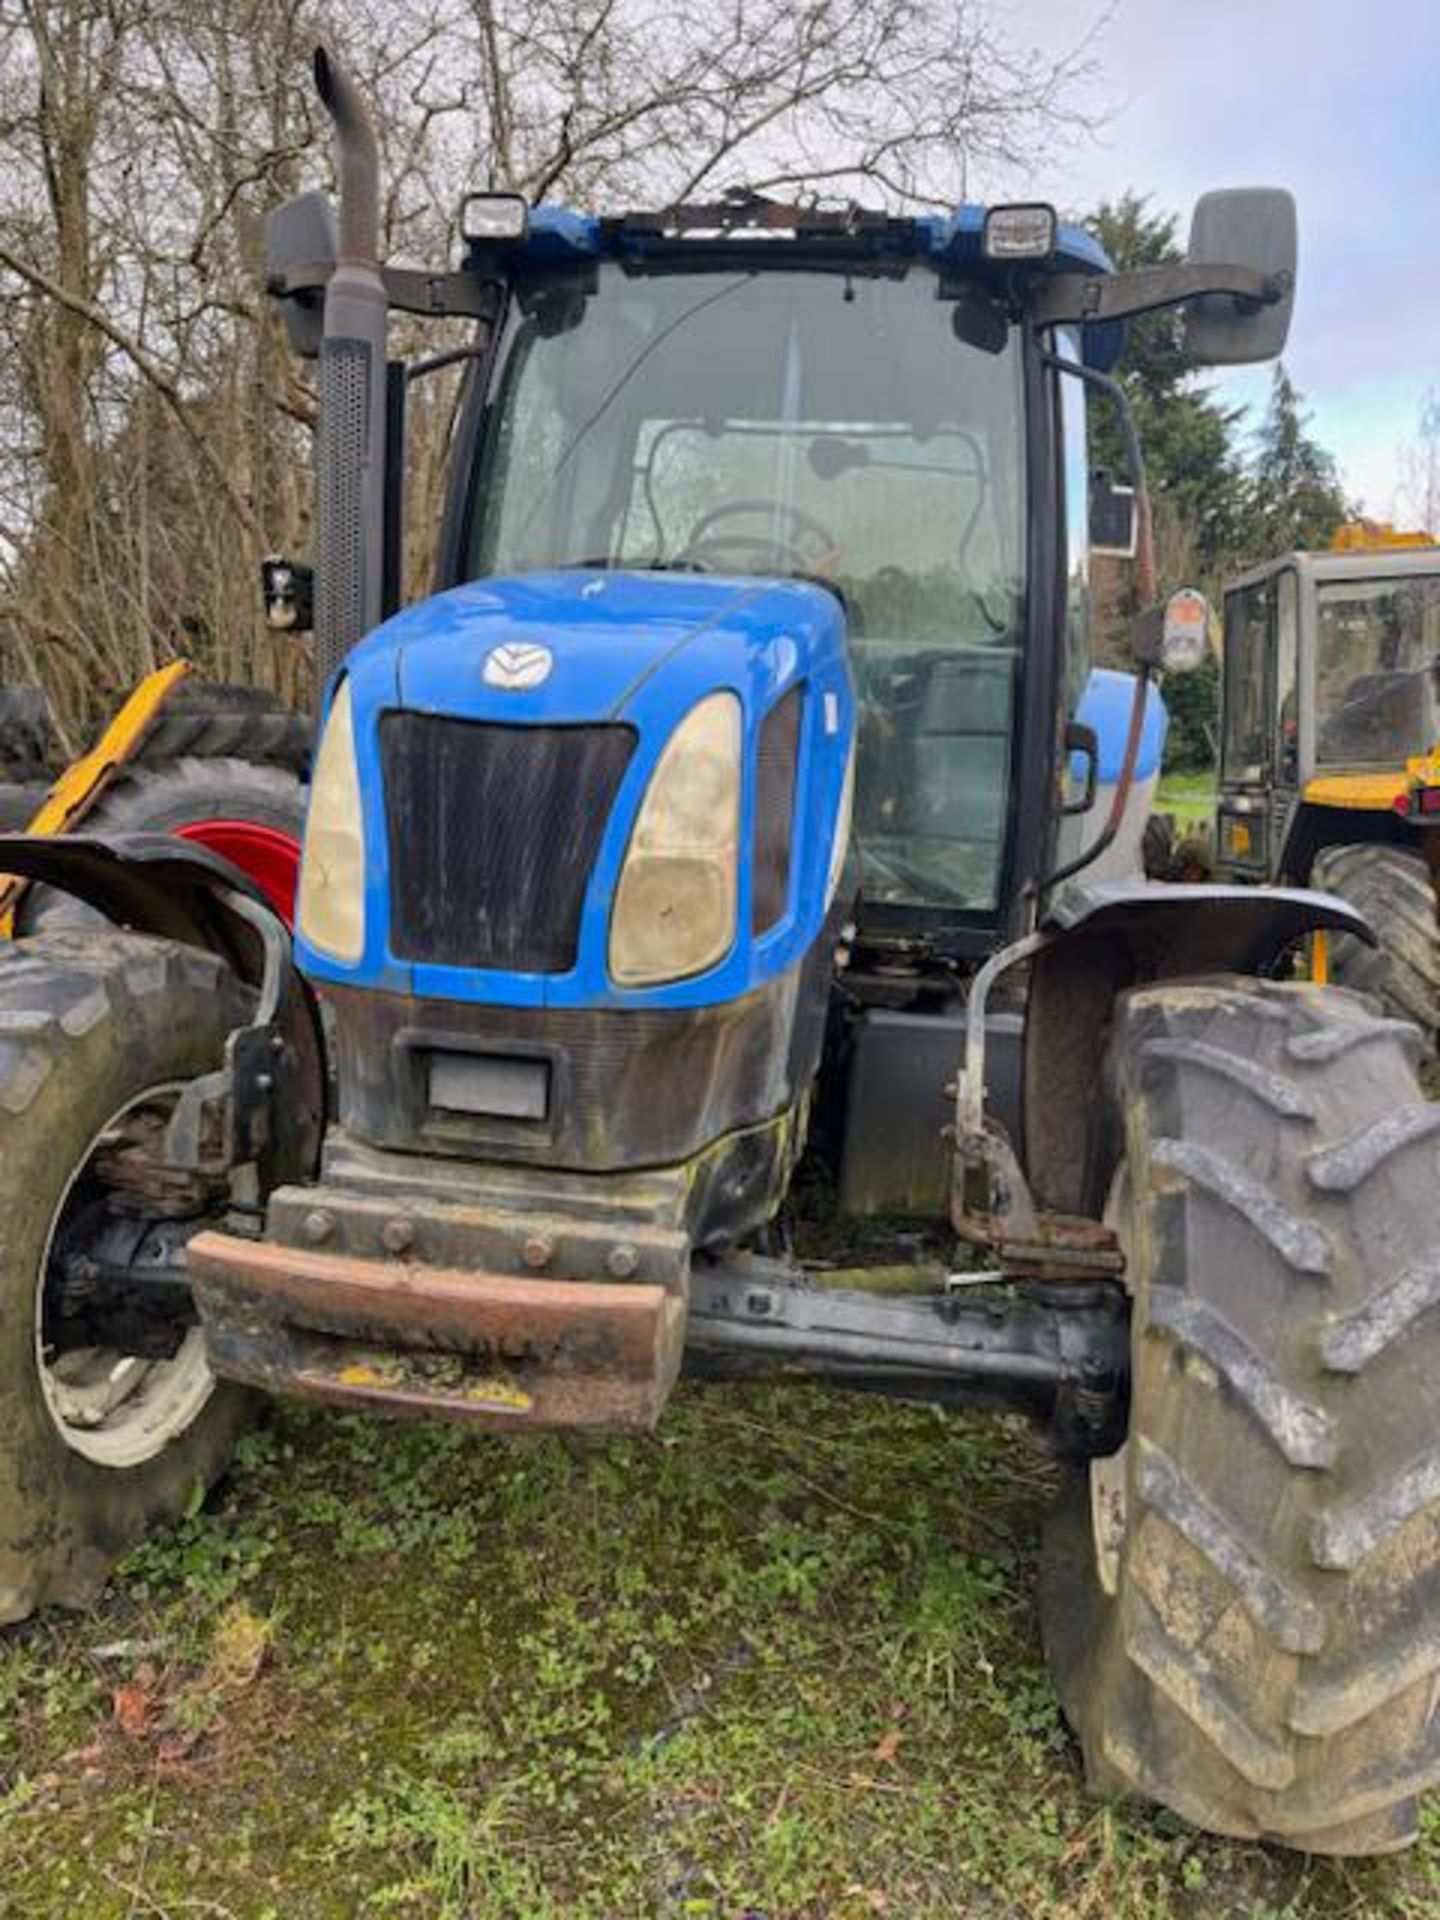 2008 NEW HOLLAND T6010 TRACTOR